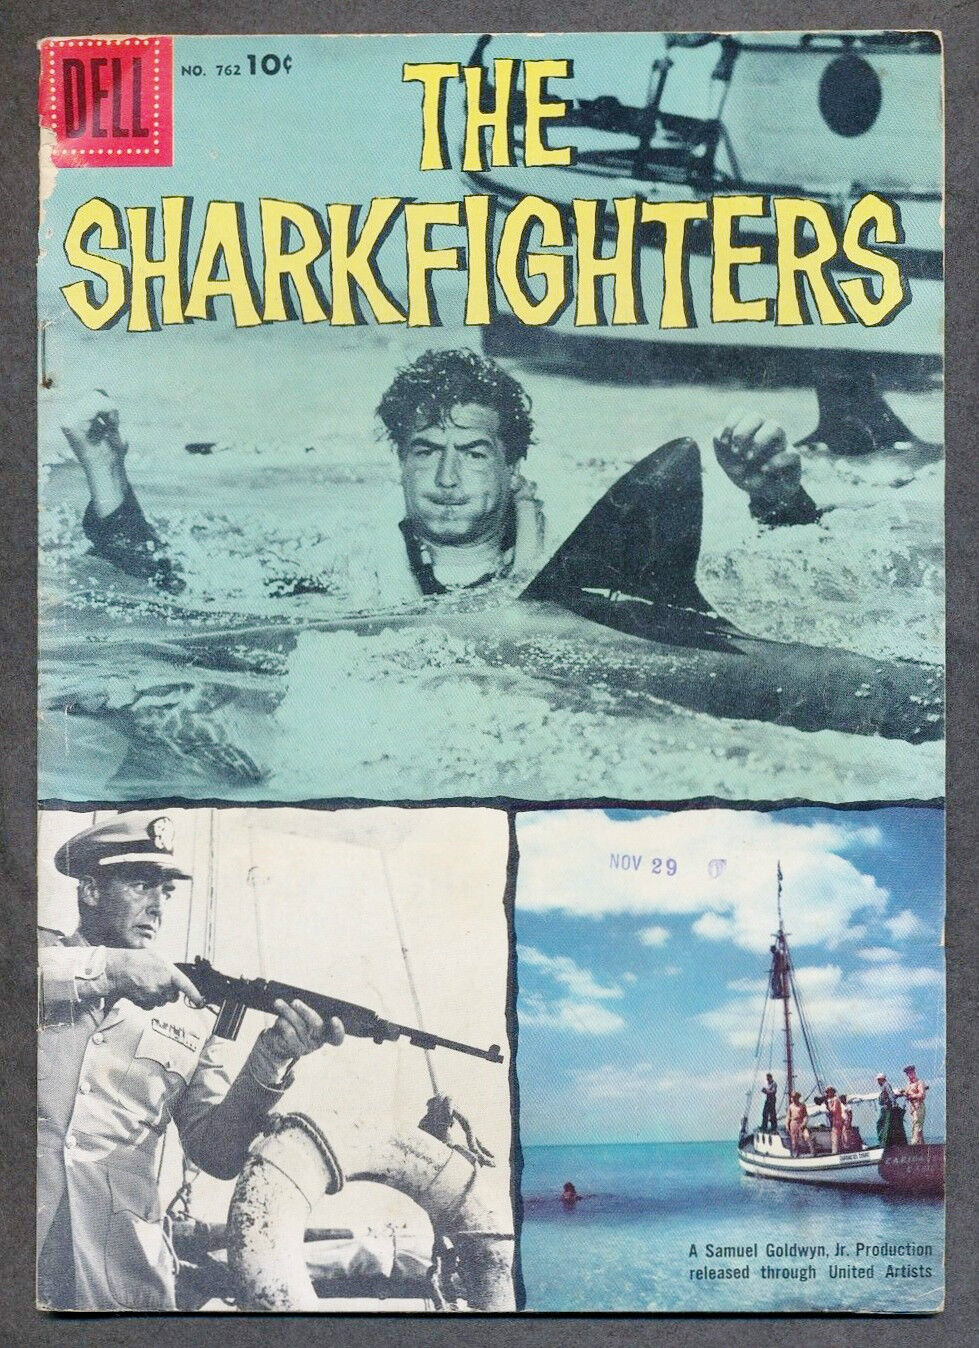 THE SHARKFIGHTERS #1, (Four Color #762), FN(-), Dell, 1956